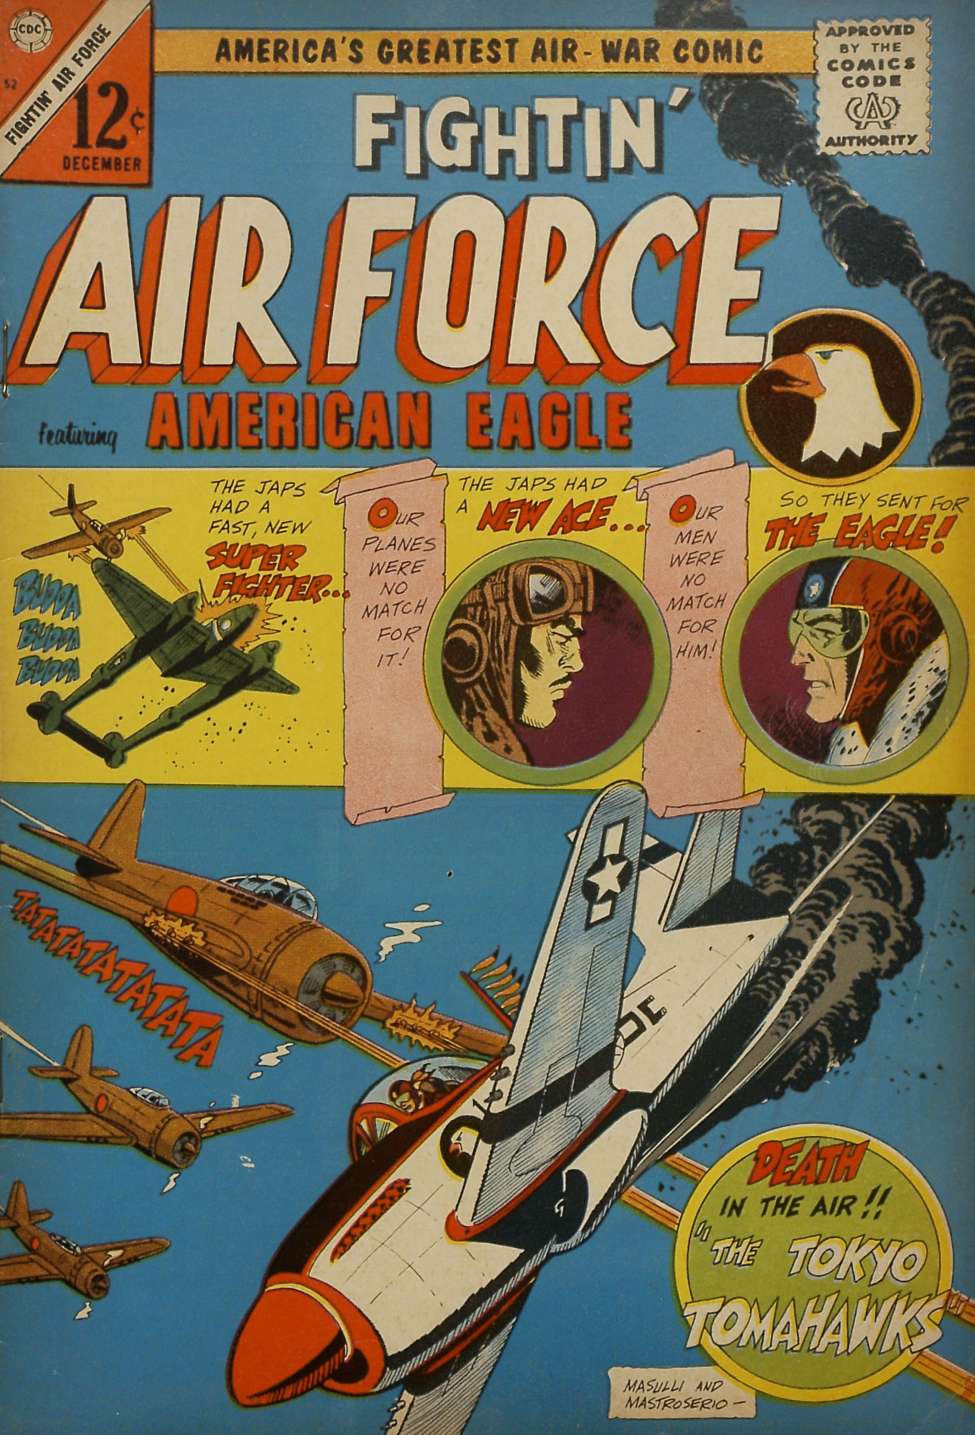 Comic Book Cover For FIghtin' Air Force 52 (alt) - Version 2